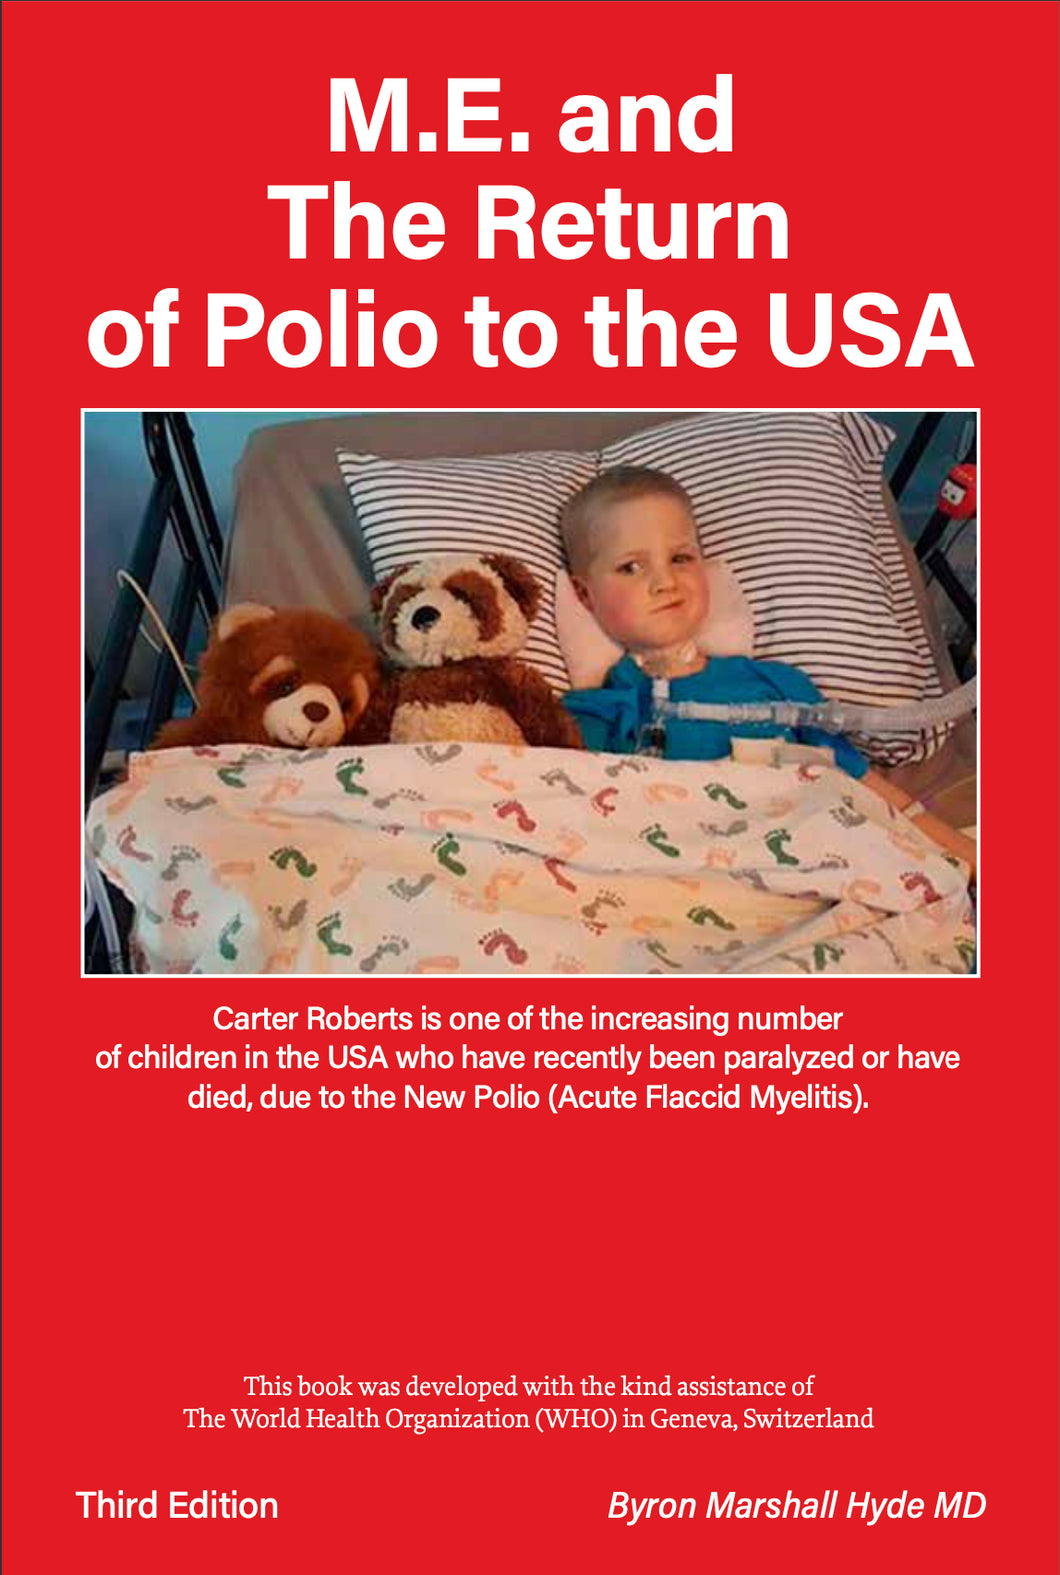 Hardcover - M.E. and The Return of Polio to the USA - 3rd Edition